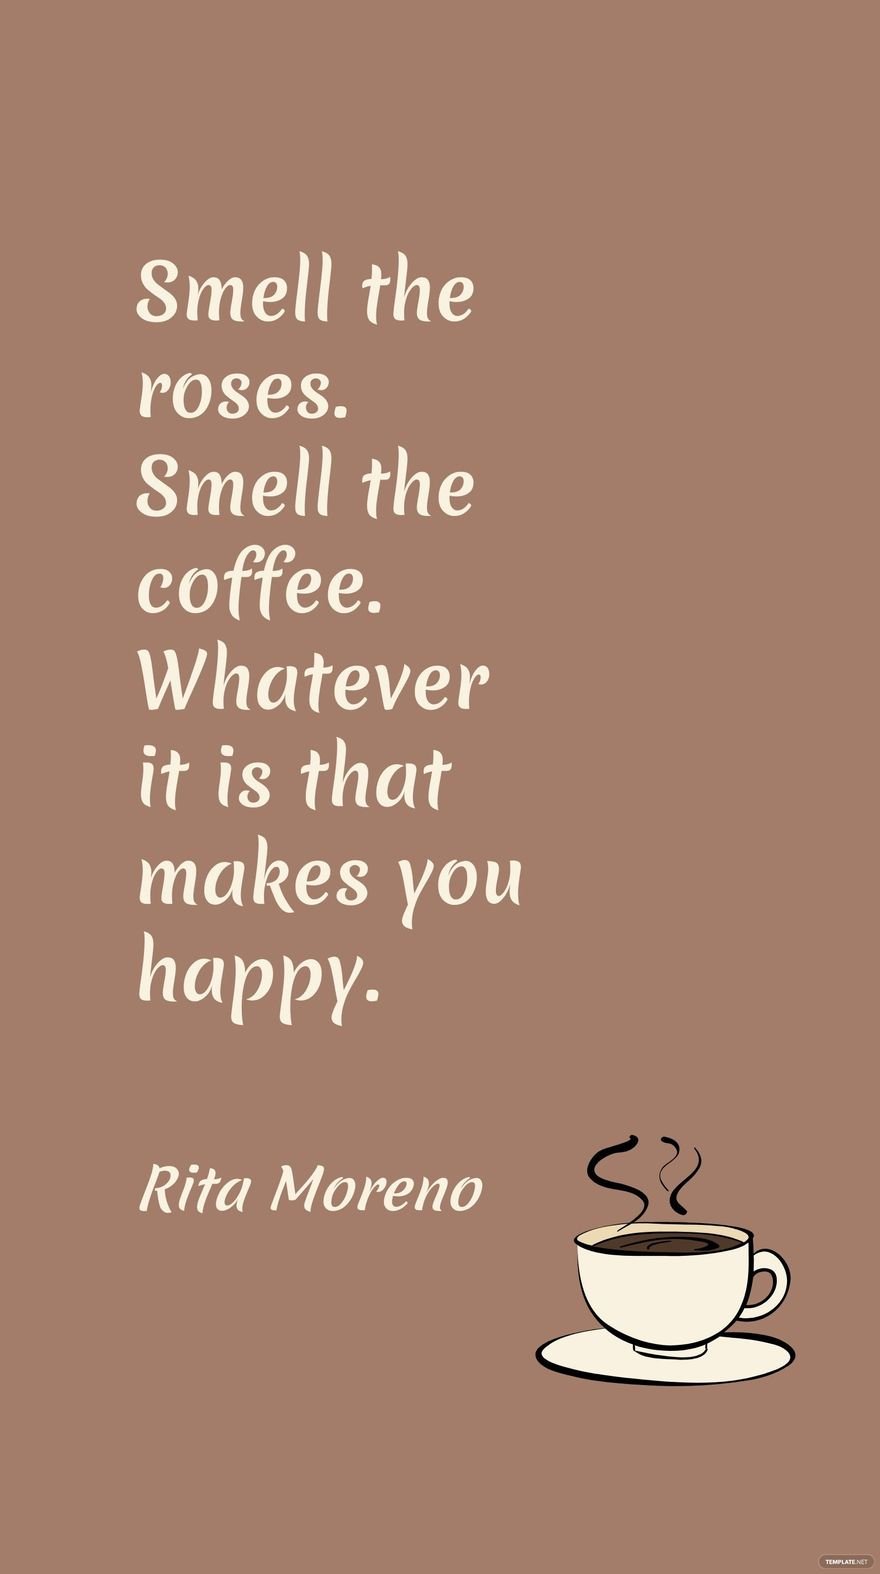 Rita Moreno - Smell the roses. Smell the coffee. Whatever it is that makes you happy. in JPG